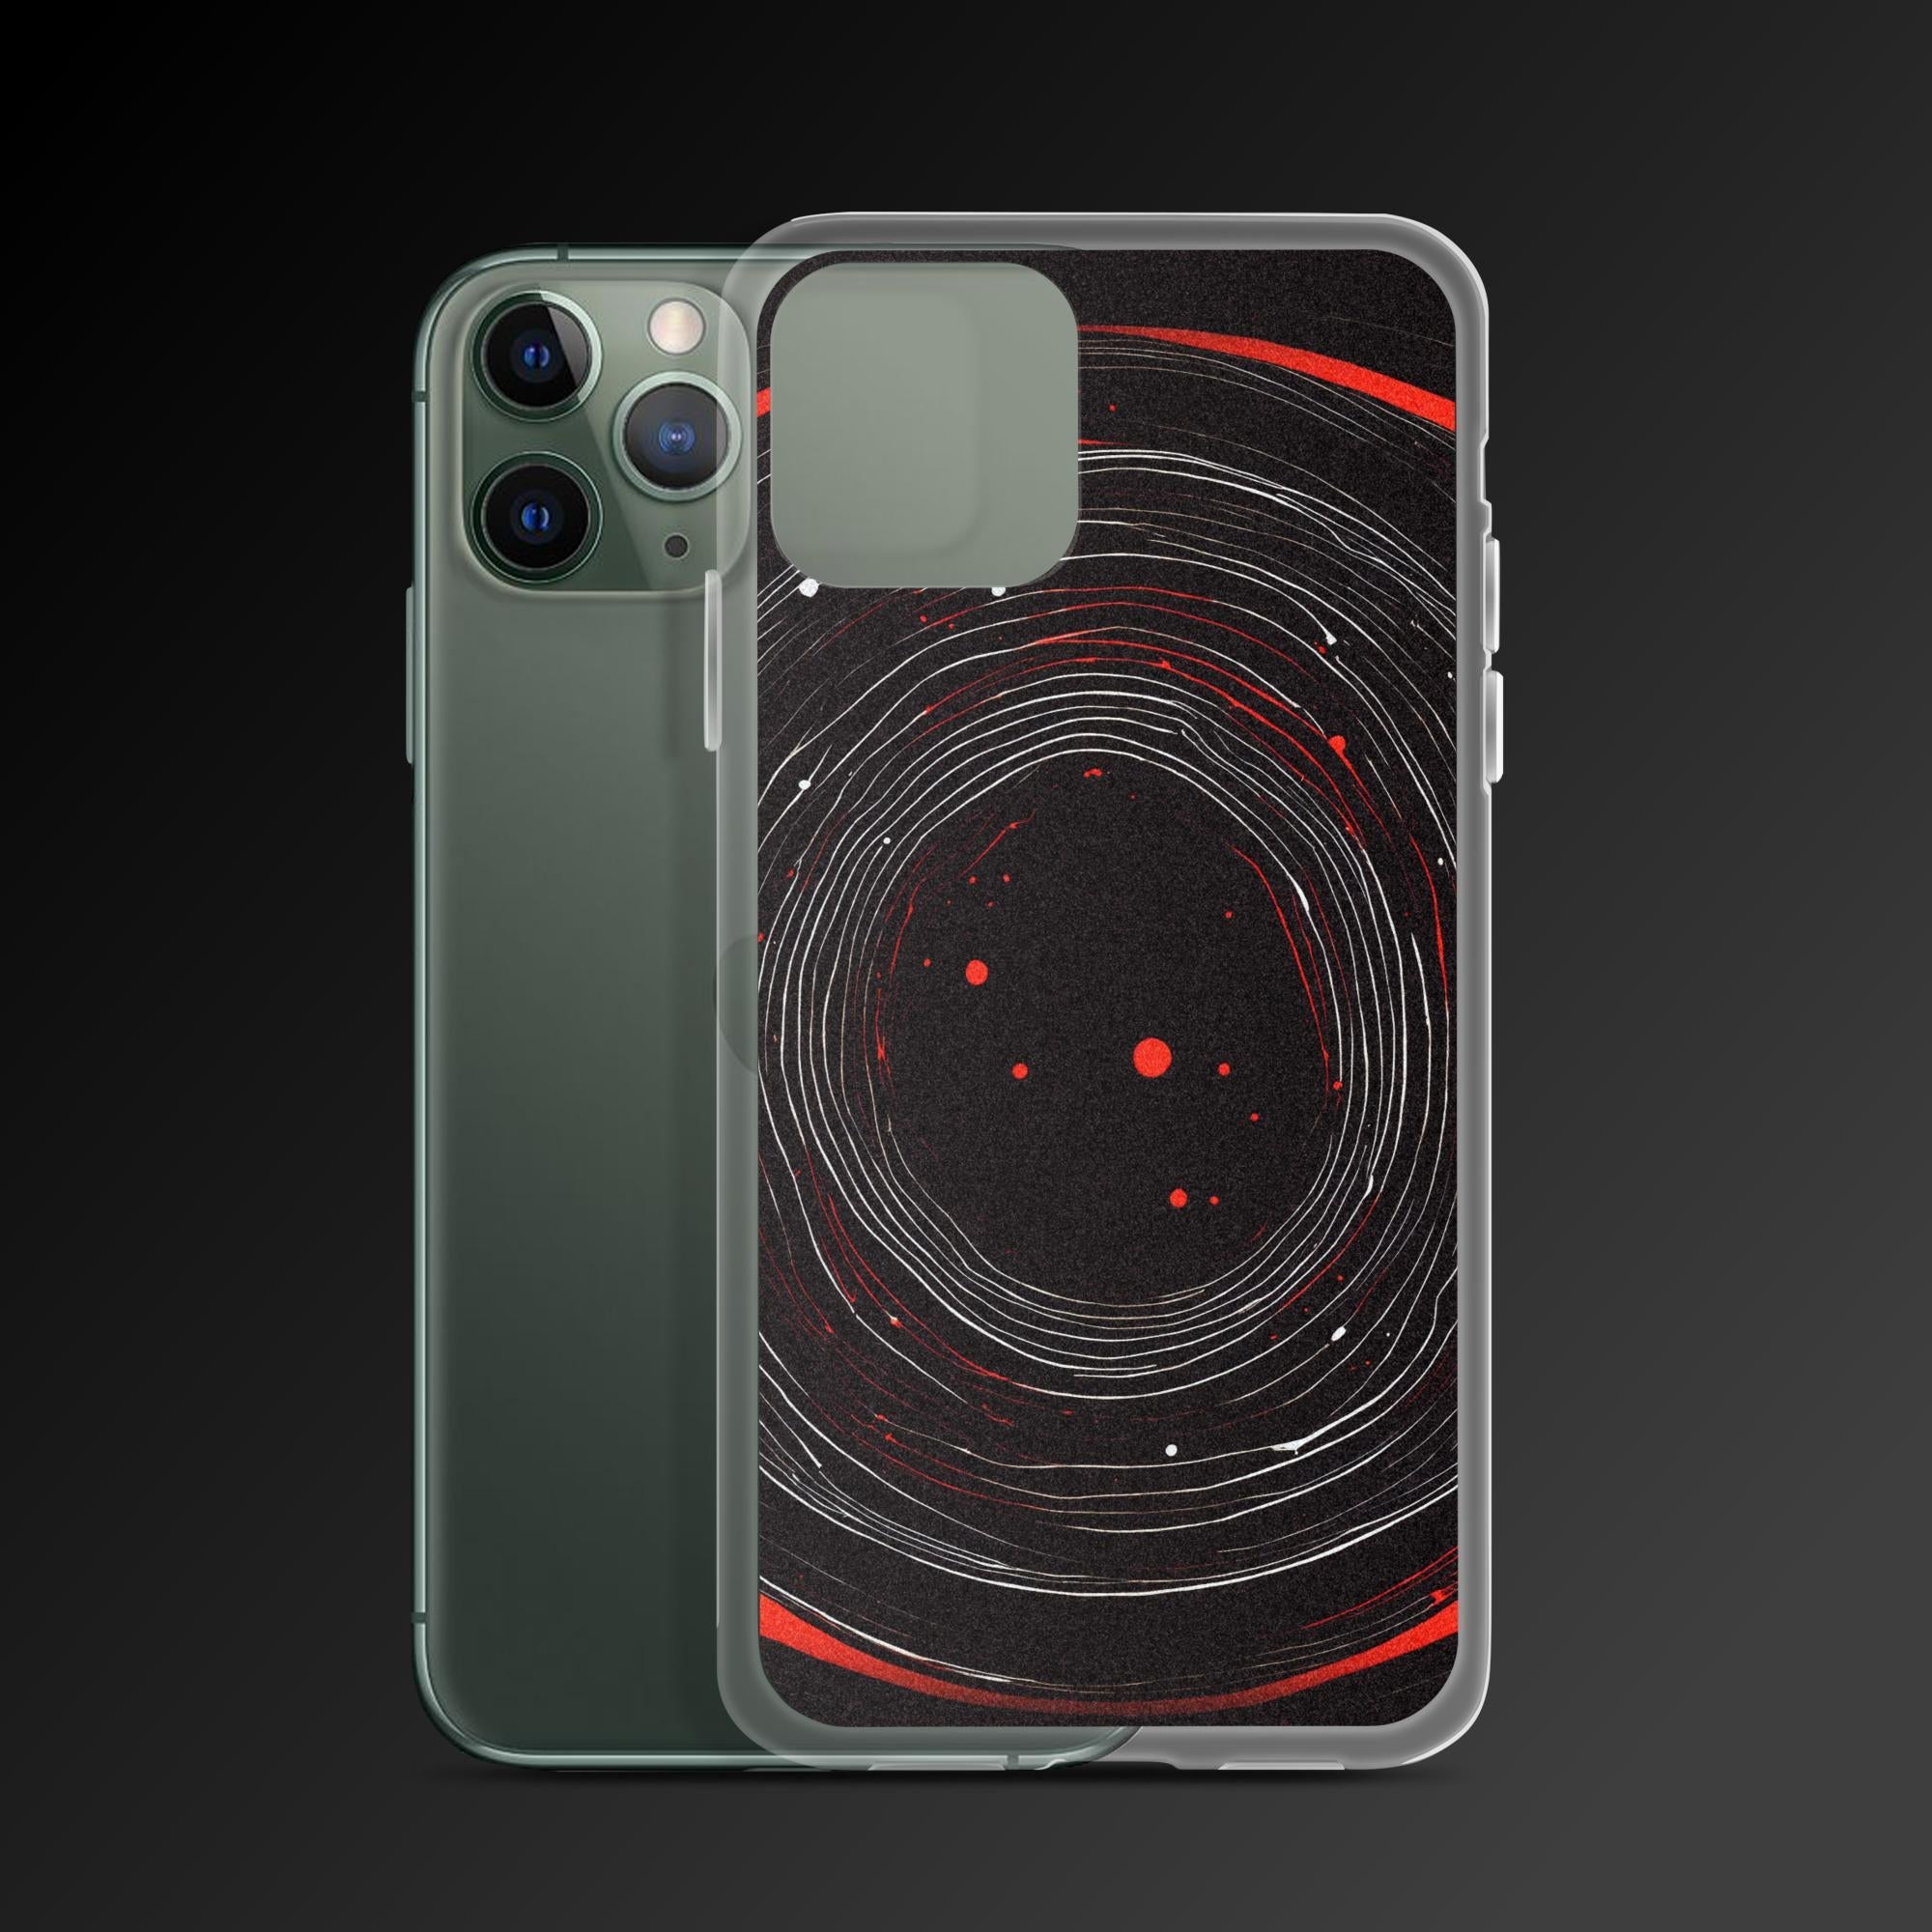 "Gory black hole" clear iphone case - Clear iphone case - Ever colorful